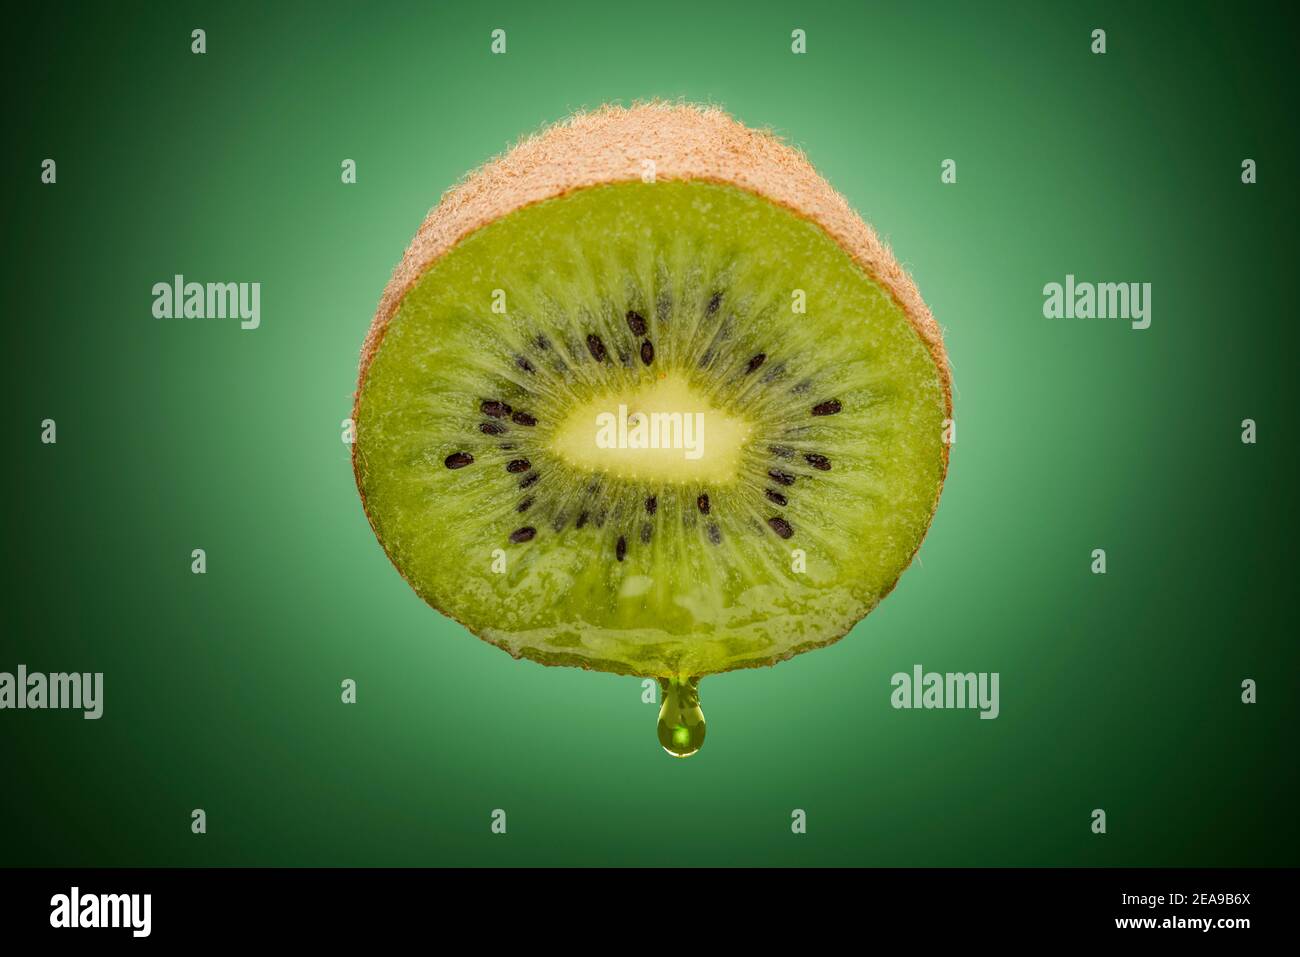 sliced kiwi fruit with dripping juice on green background Stock Photo